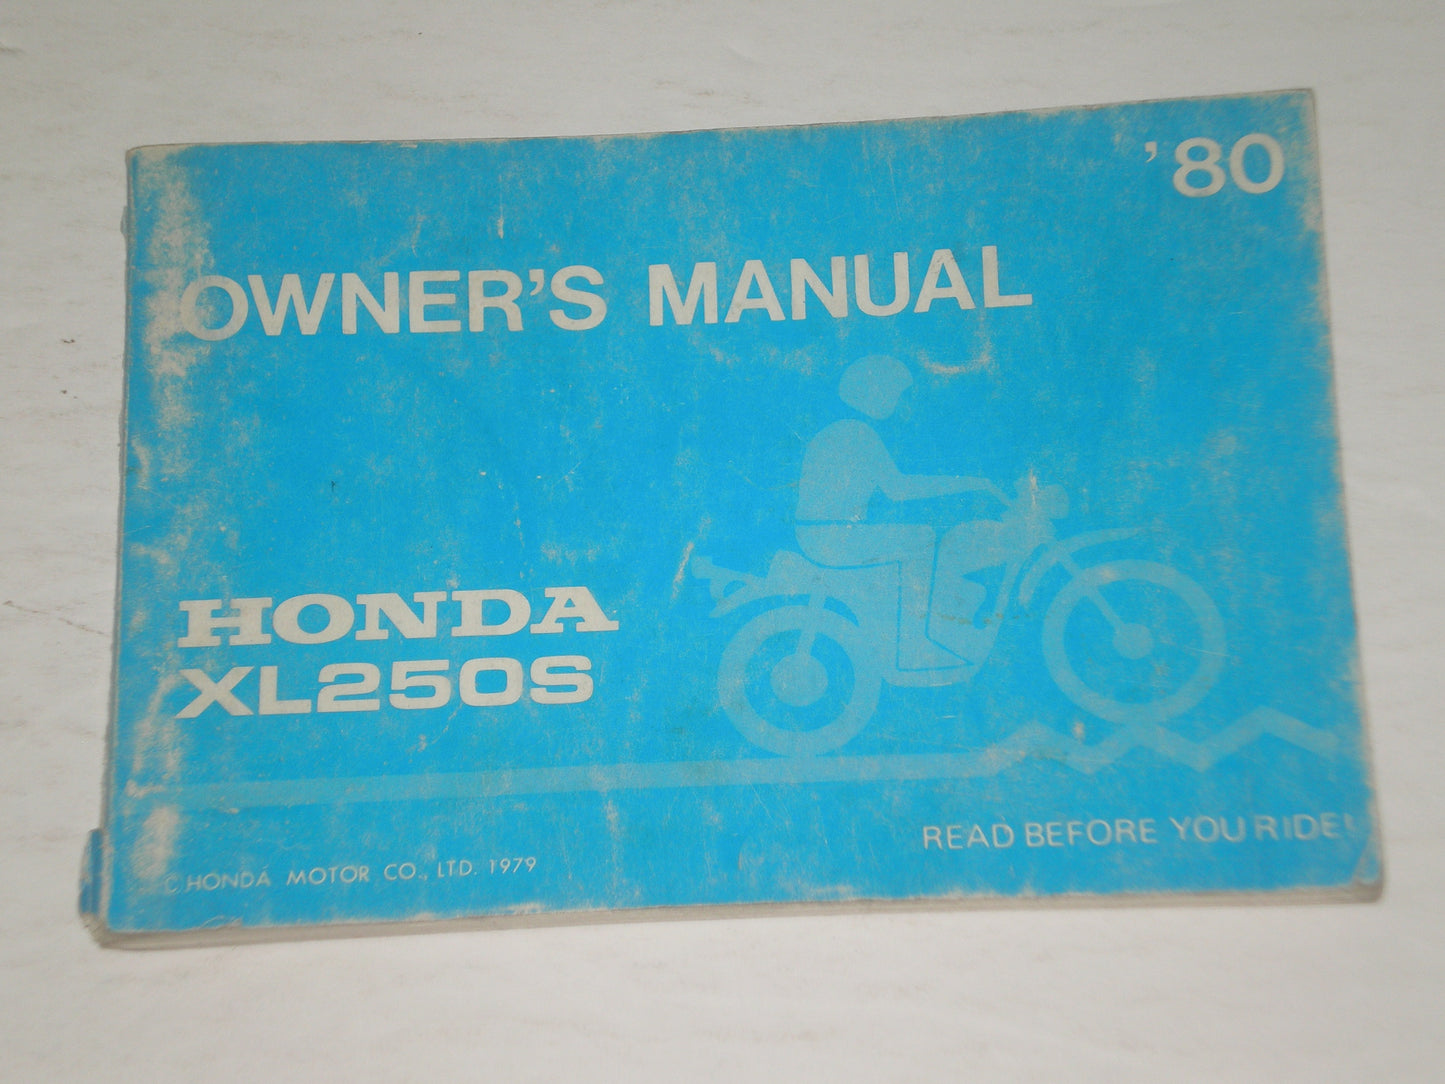 HONDA XL250S A 1980 Dual Sport Motorcycle  Owner's Manual   #A165